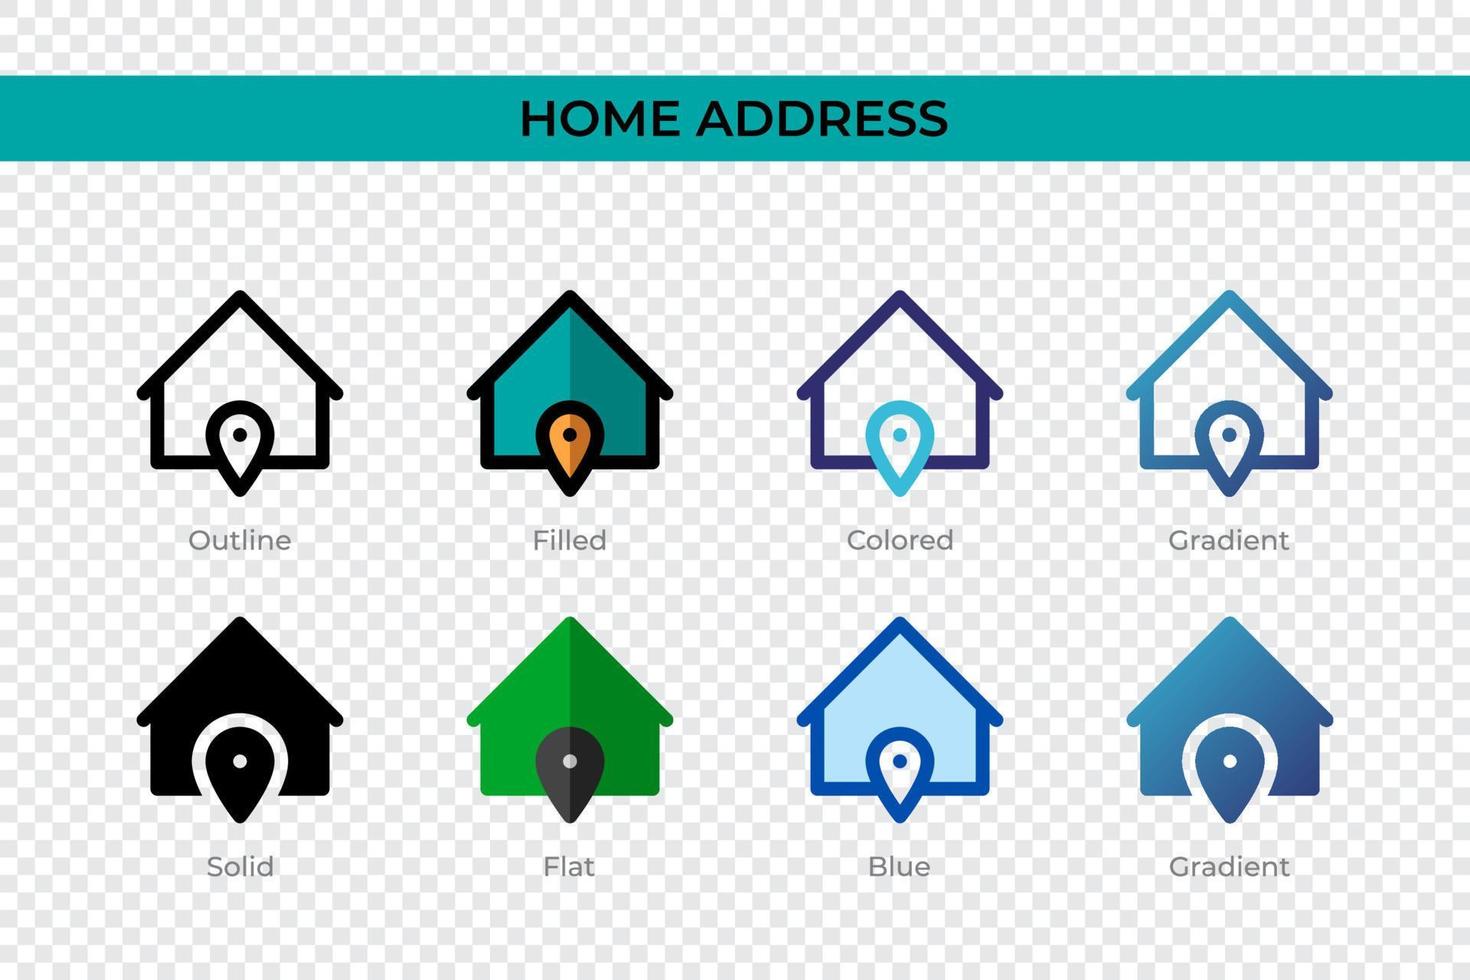 Home Address icon in different style. Home Address vector icons designed in outline, solid, colored, filled, gradient, and flat style. Symbol, logo illustration. Vector illustration